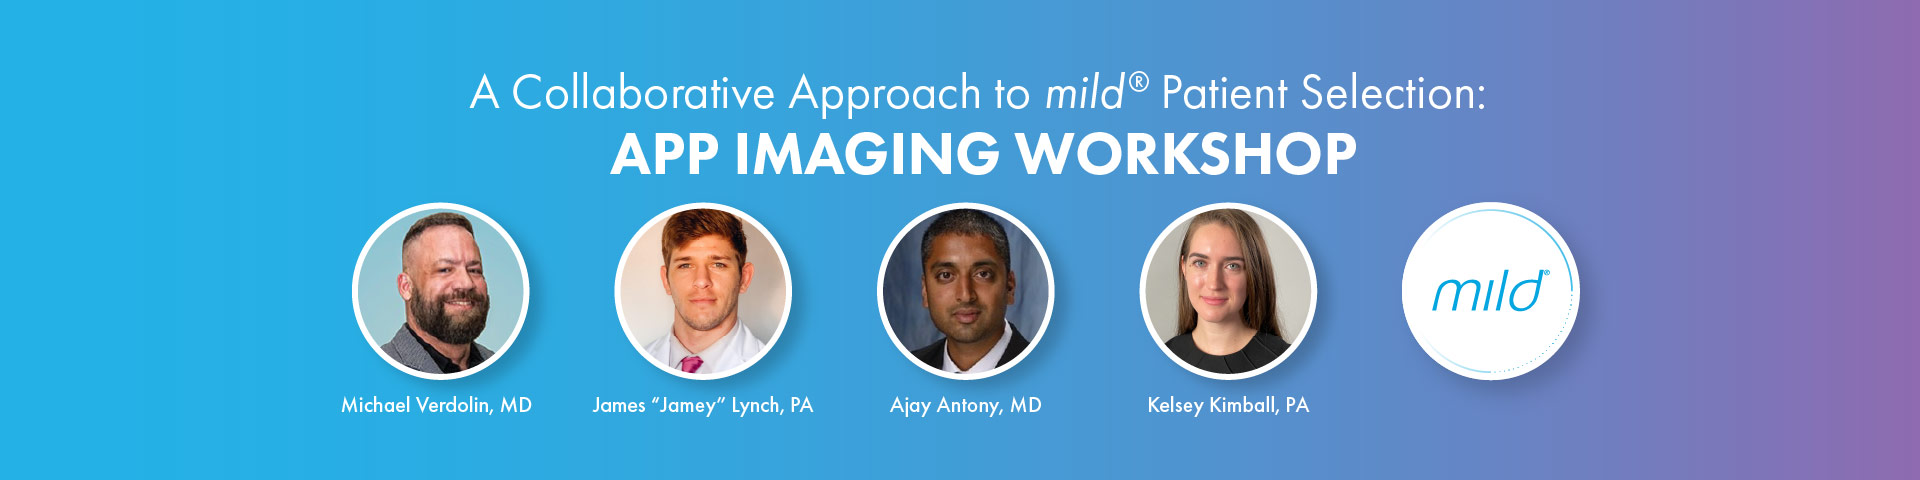 Image: 4 headshots of mild® practitioners. Text: A Collaborative Approach to mild® Patient Selection: APP IMAGING WORKSHOP